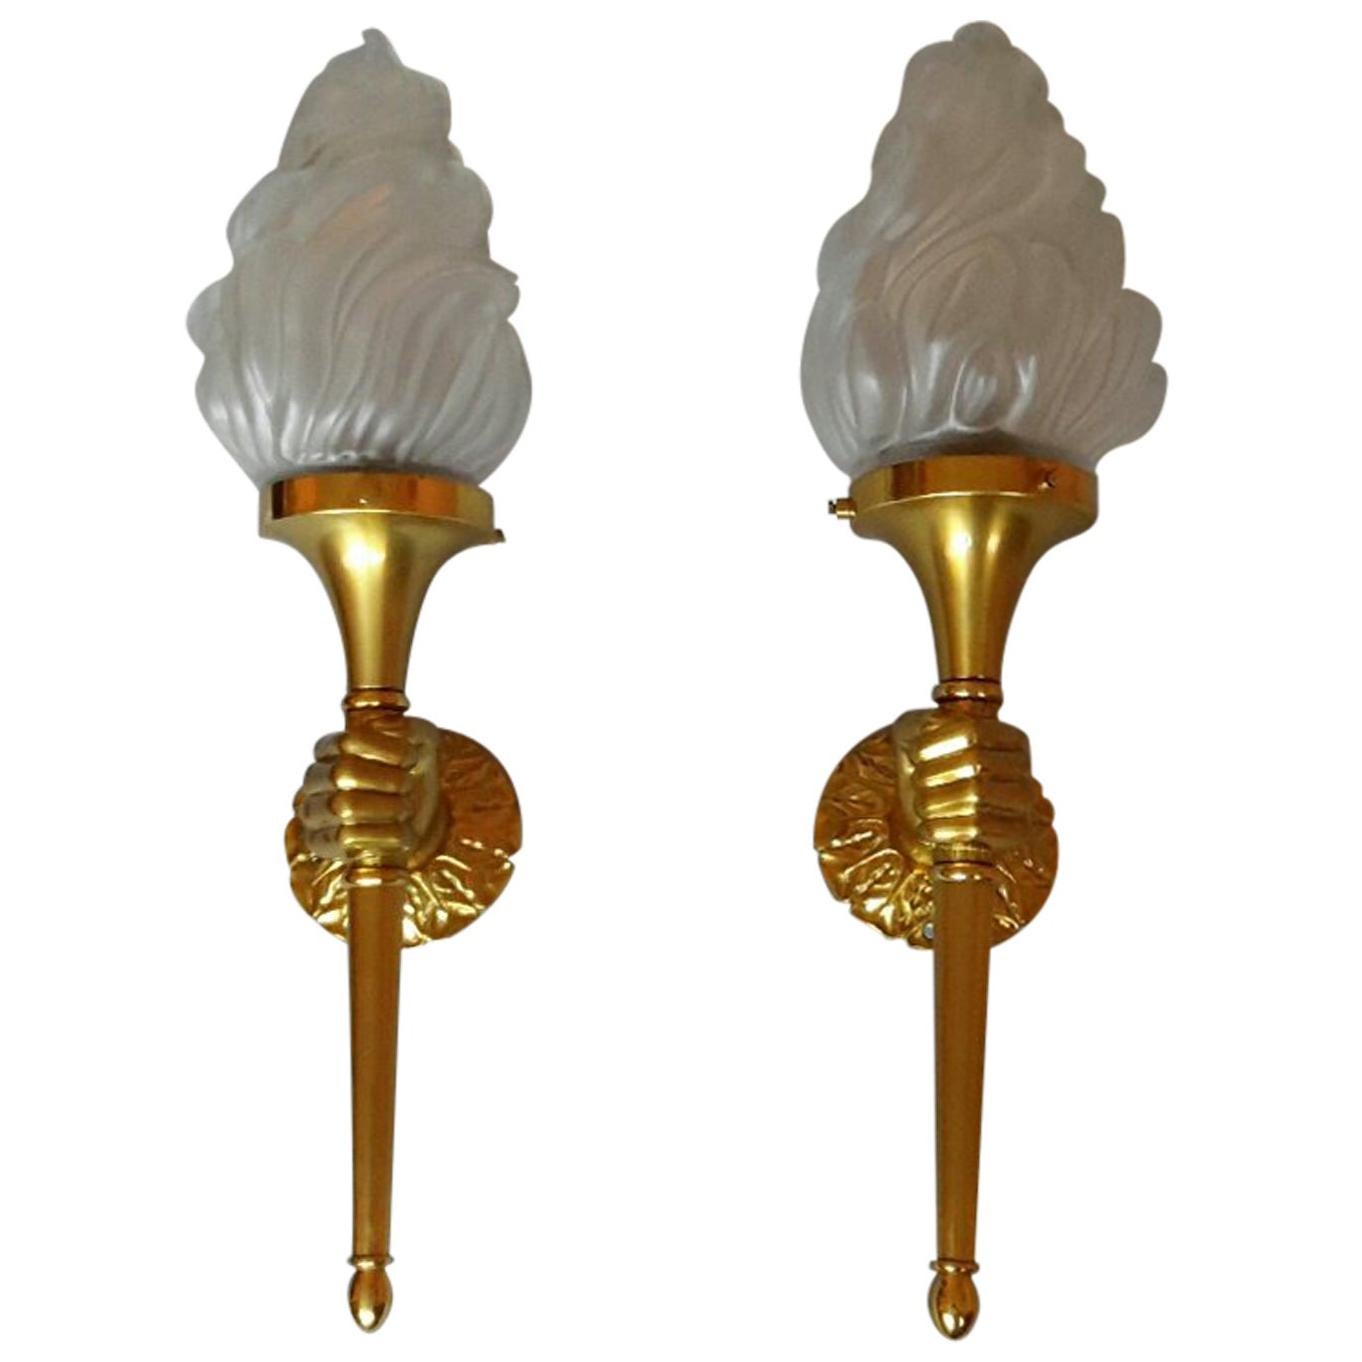 Neoclassical Pair of Big Gilt Bronze Sconces by Maison Bagues, France, 1960